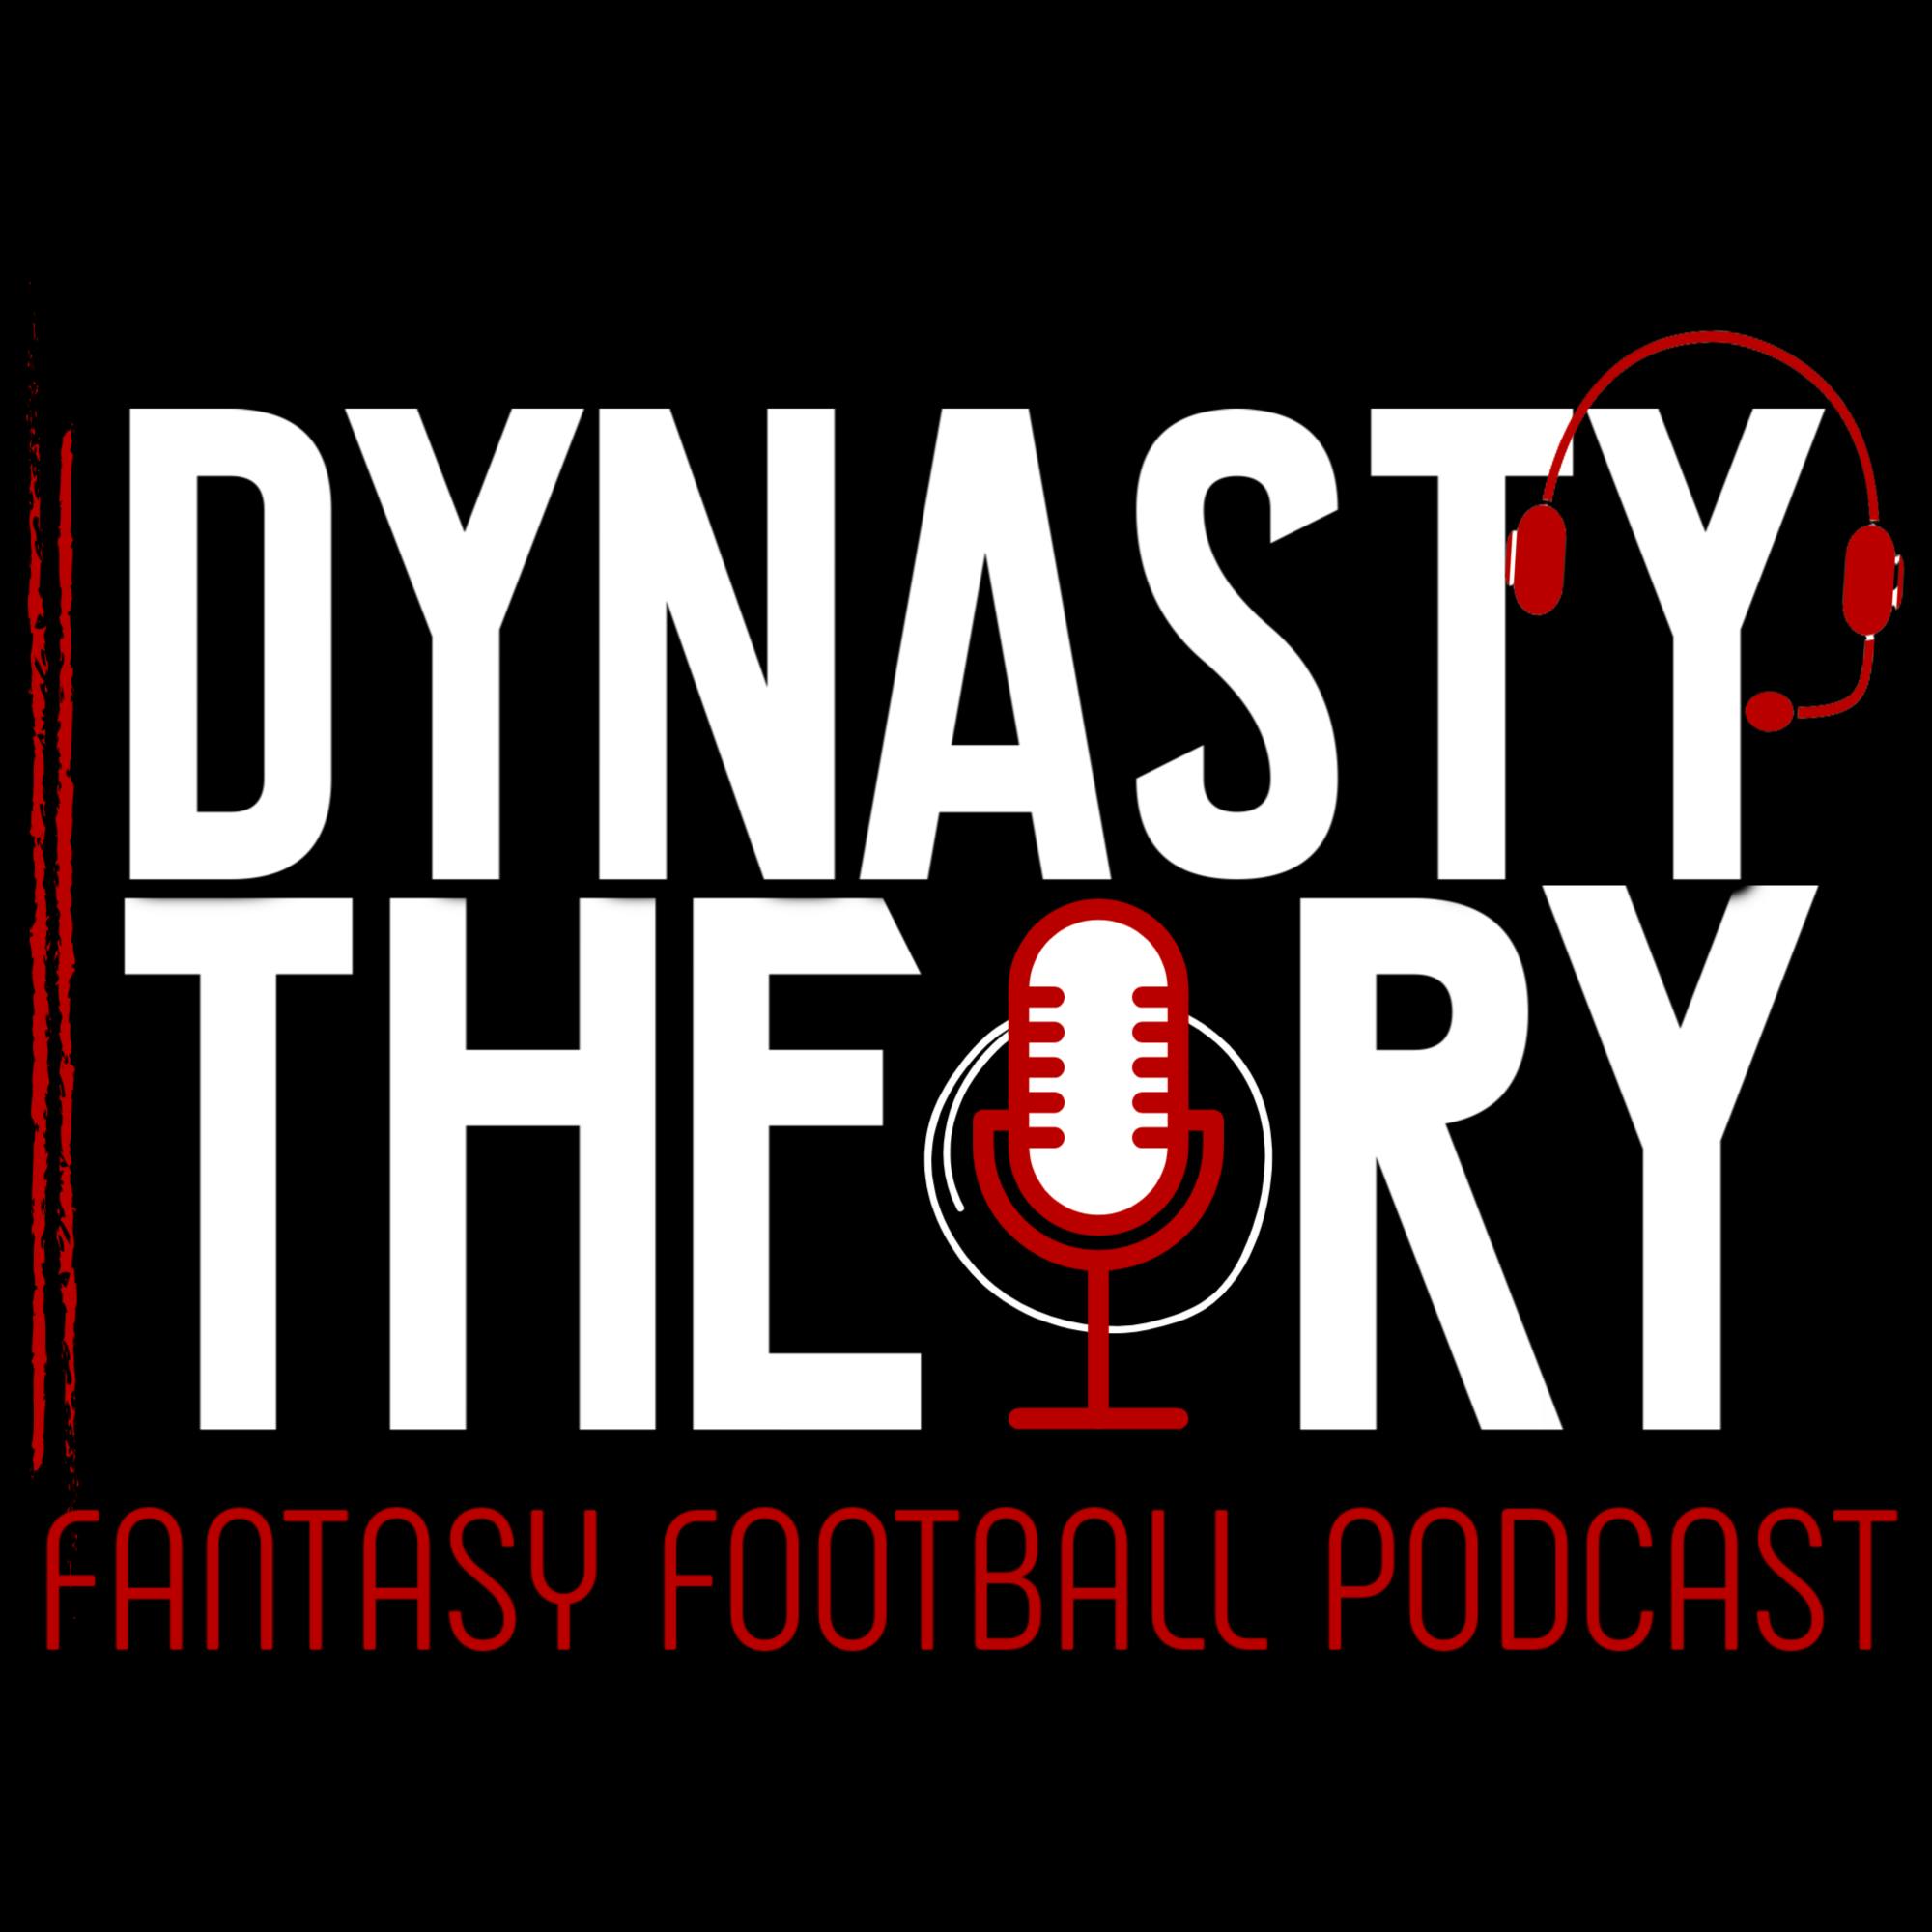 Ep. 125: The Art of the Dynasty Trade